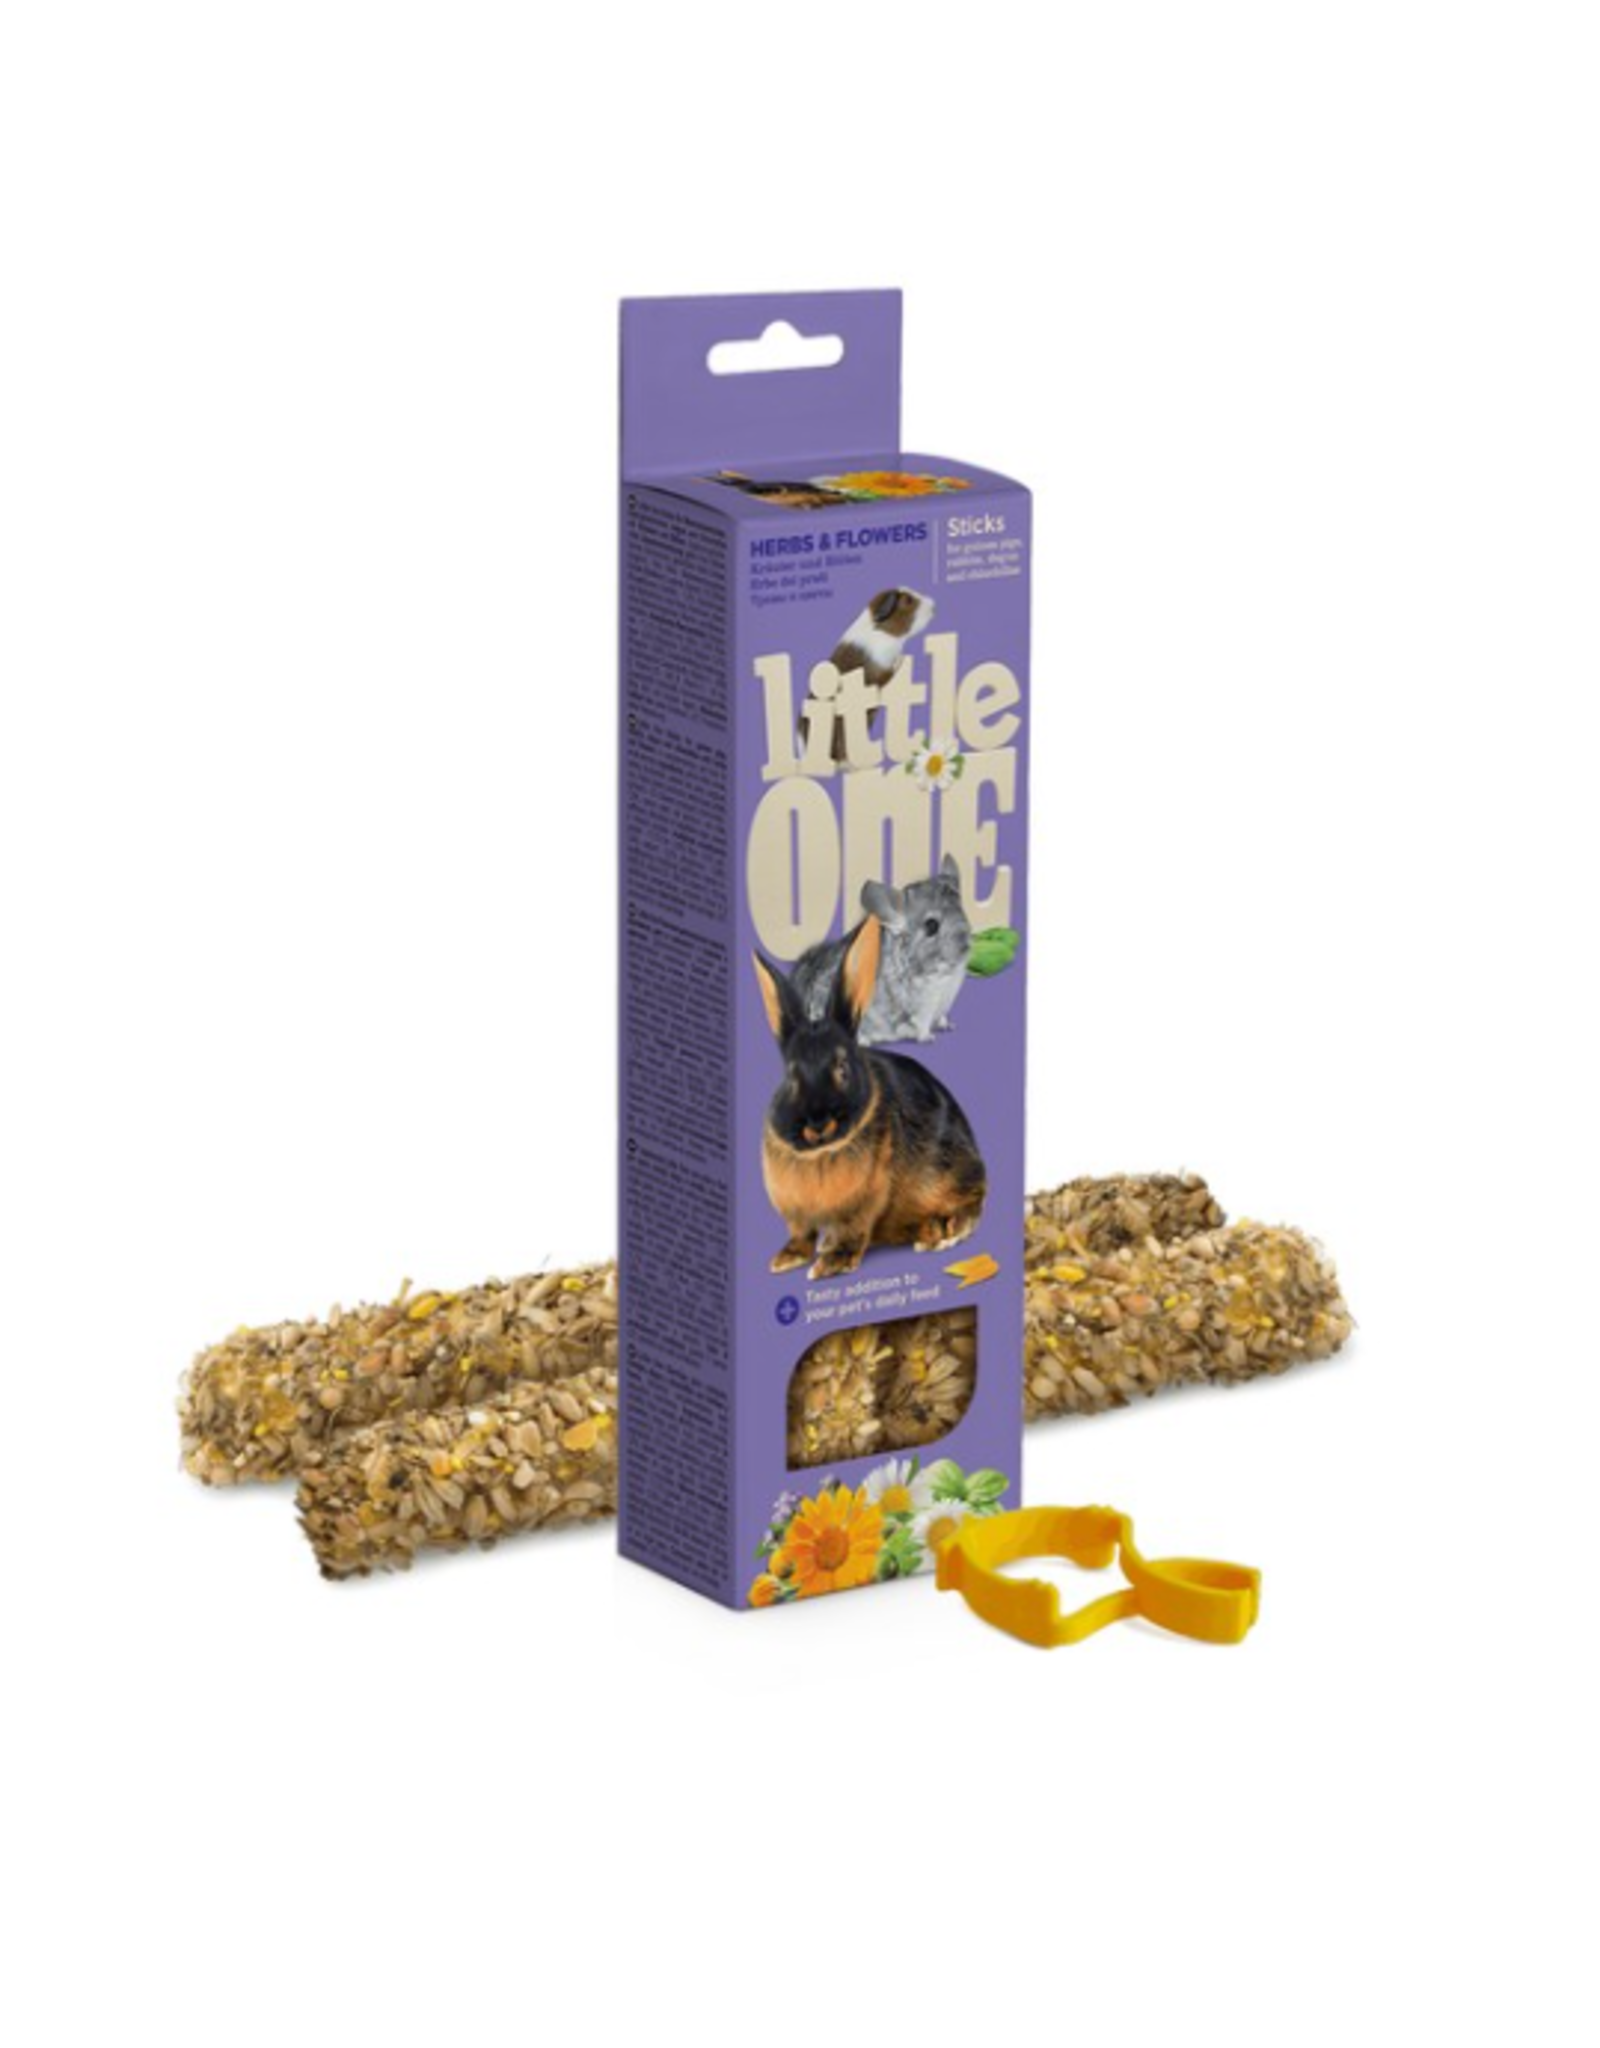 Little One Little One Sticks For Small Animals Herb & Flowers 2 Pack